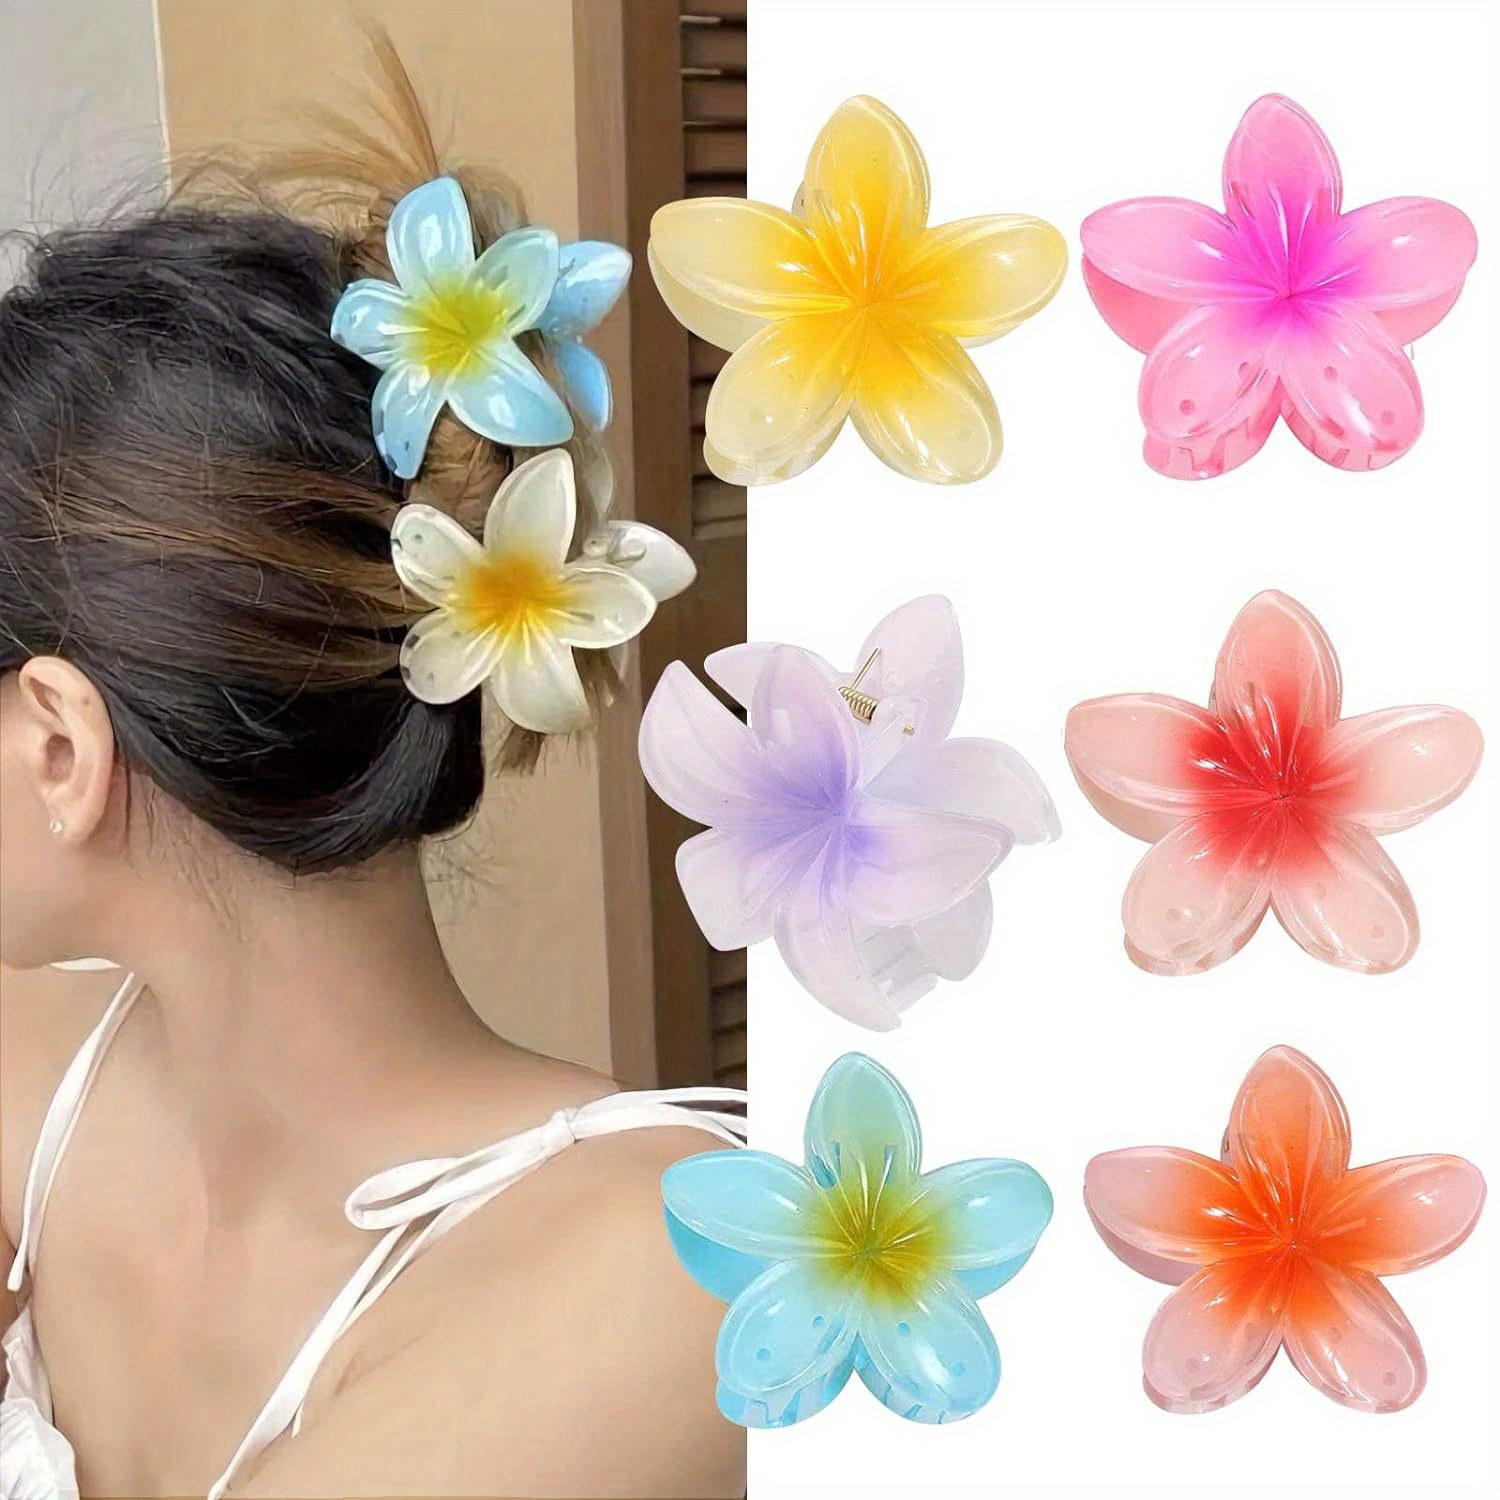 

Elegant 6-piece Flower Claw Clip Set - Non-slip, Strong Hold Hair Accessories For Women & Girls, Versatile For All Hair Types, Vibrant Gradient Colors